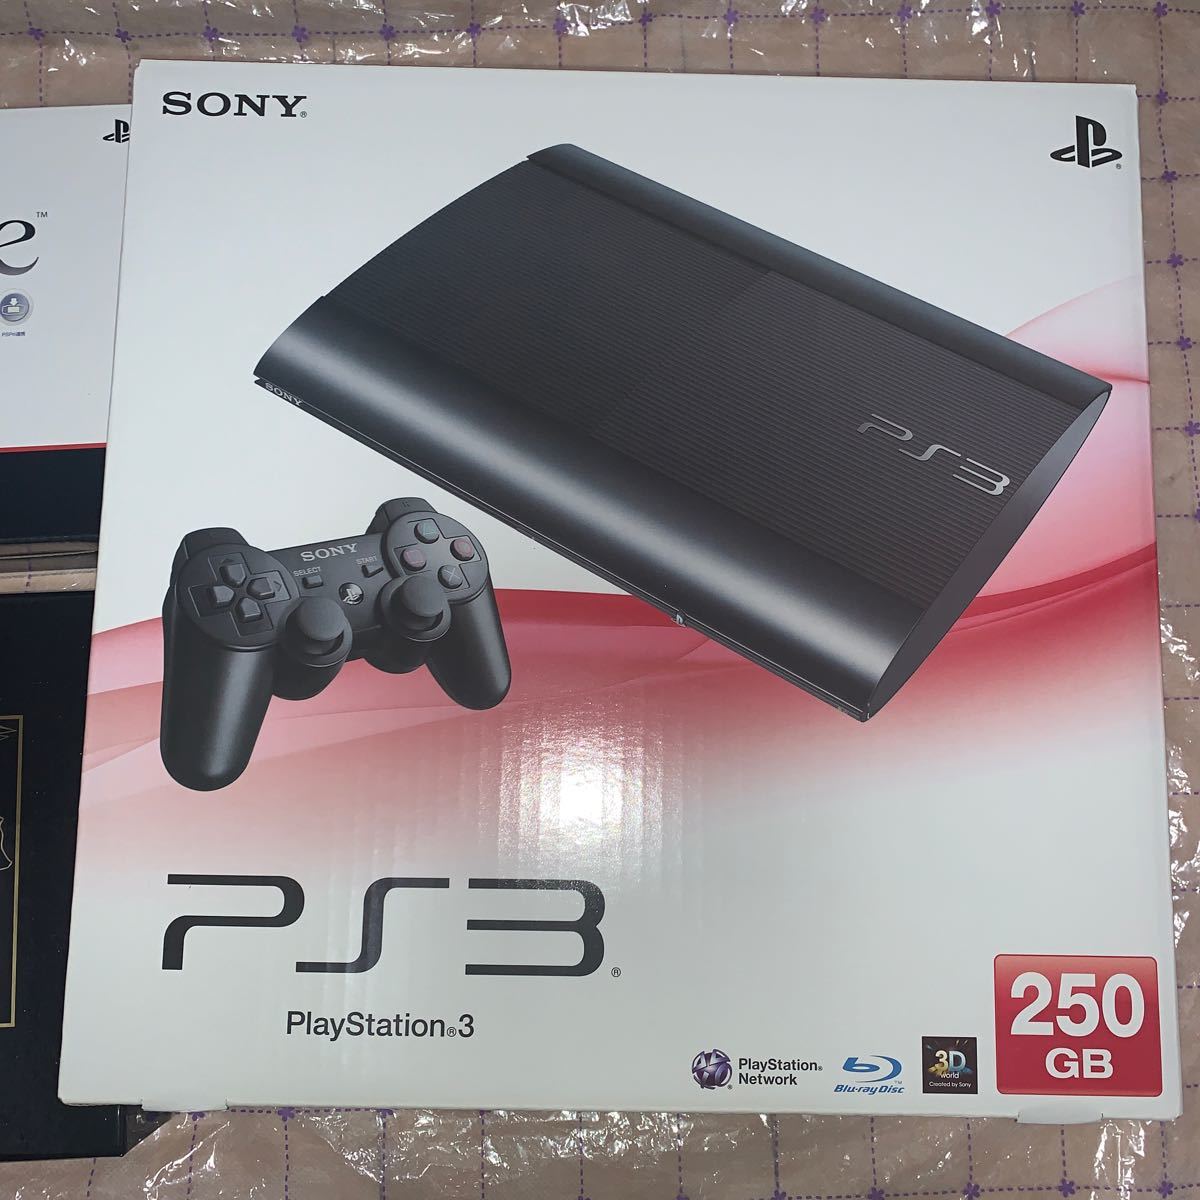 PS3+torneセット　PS3ソフト付